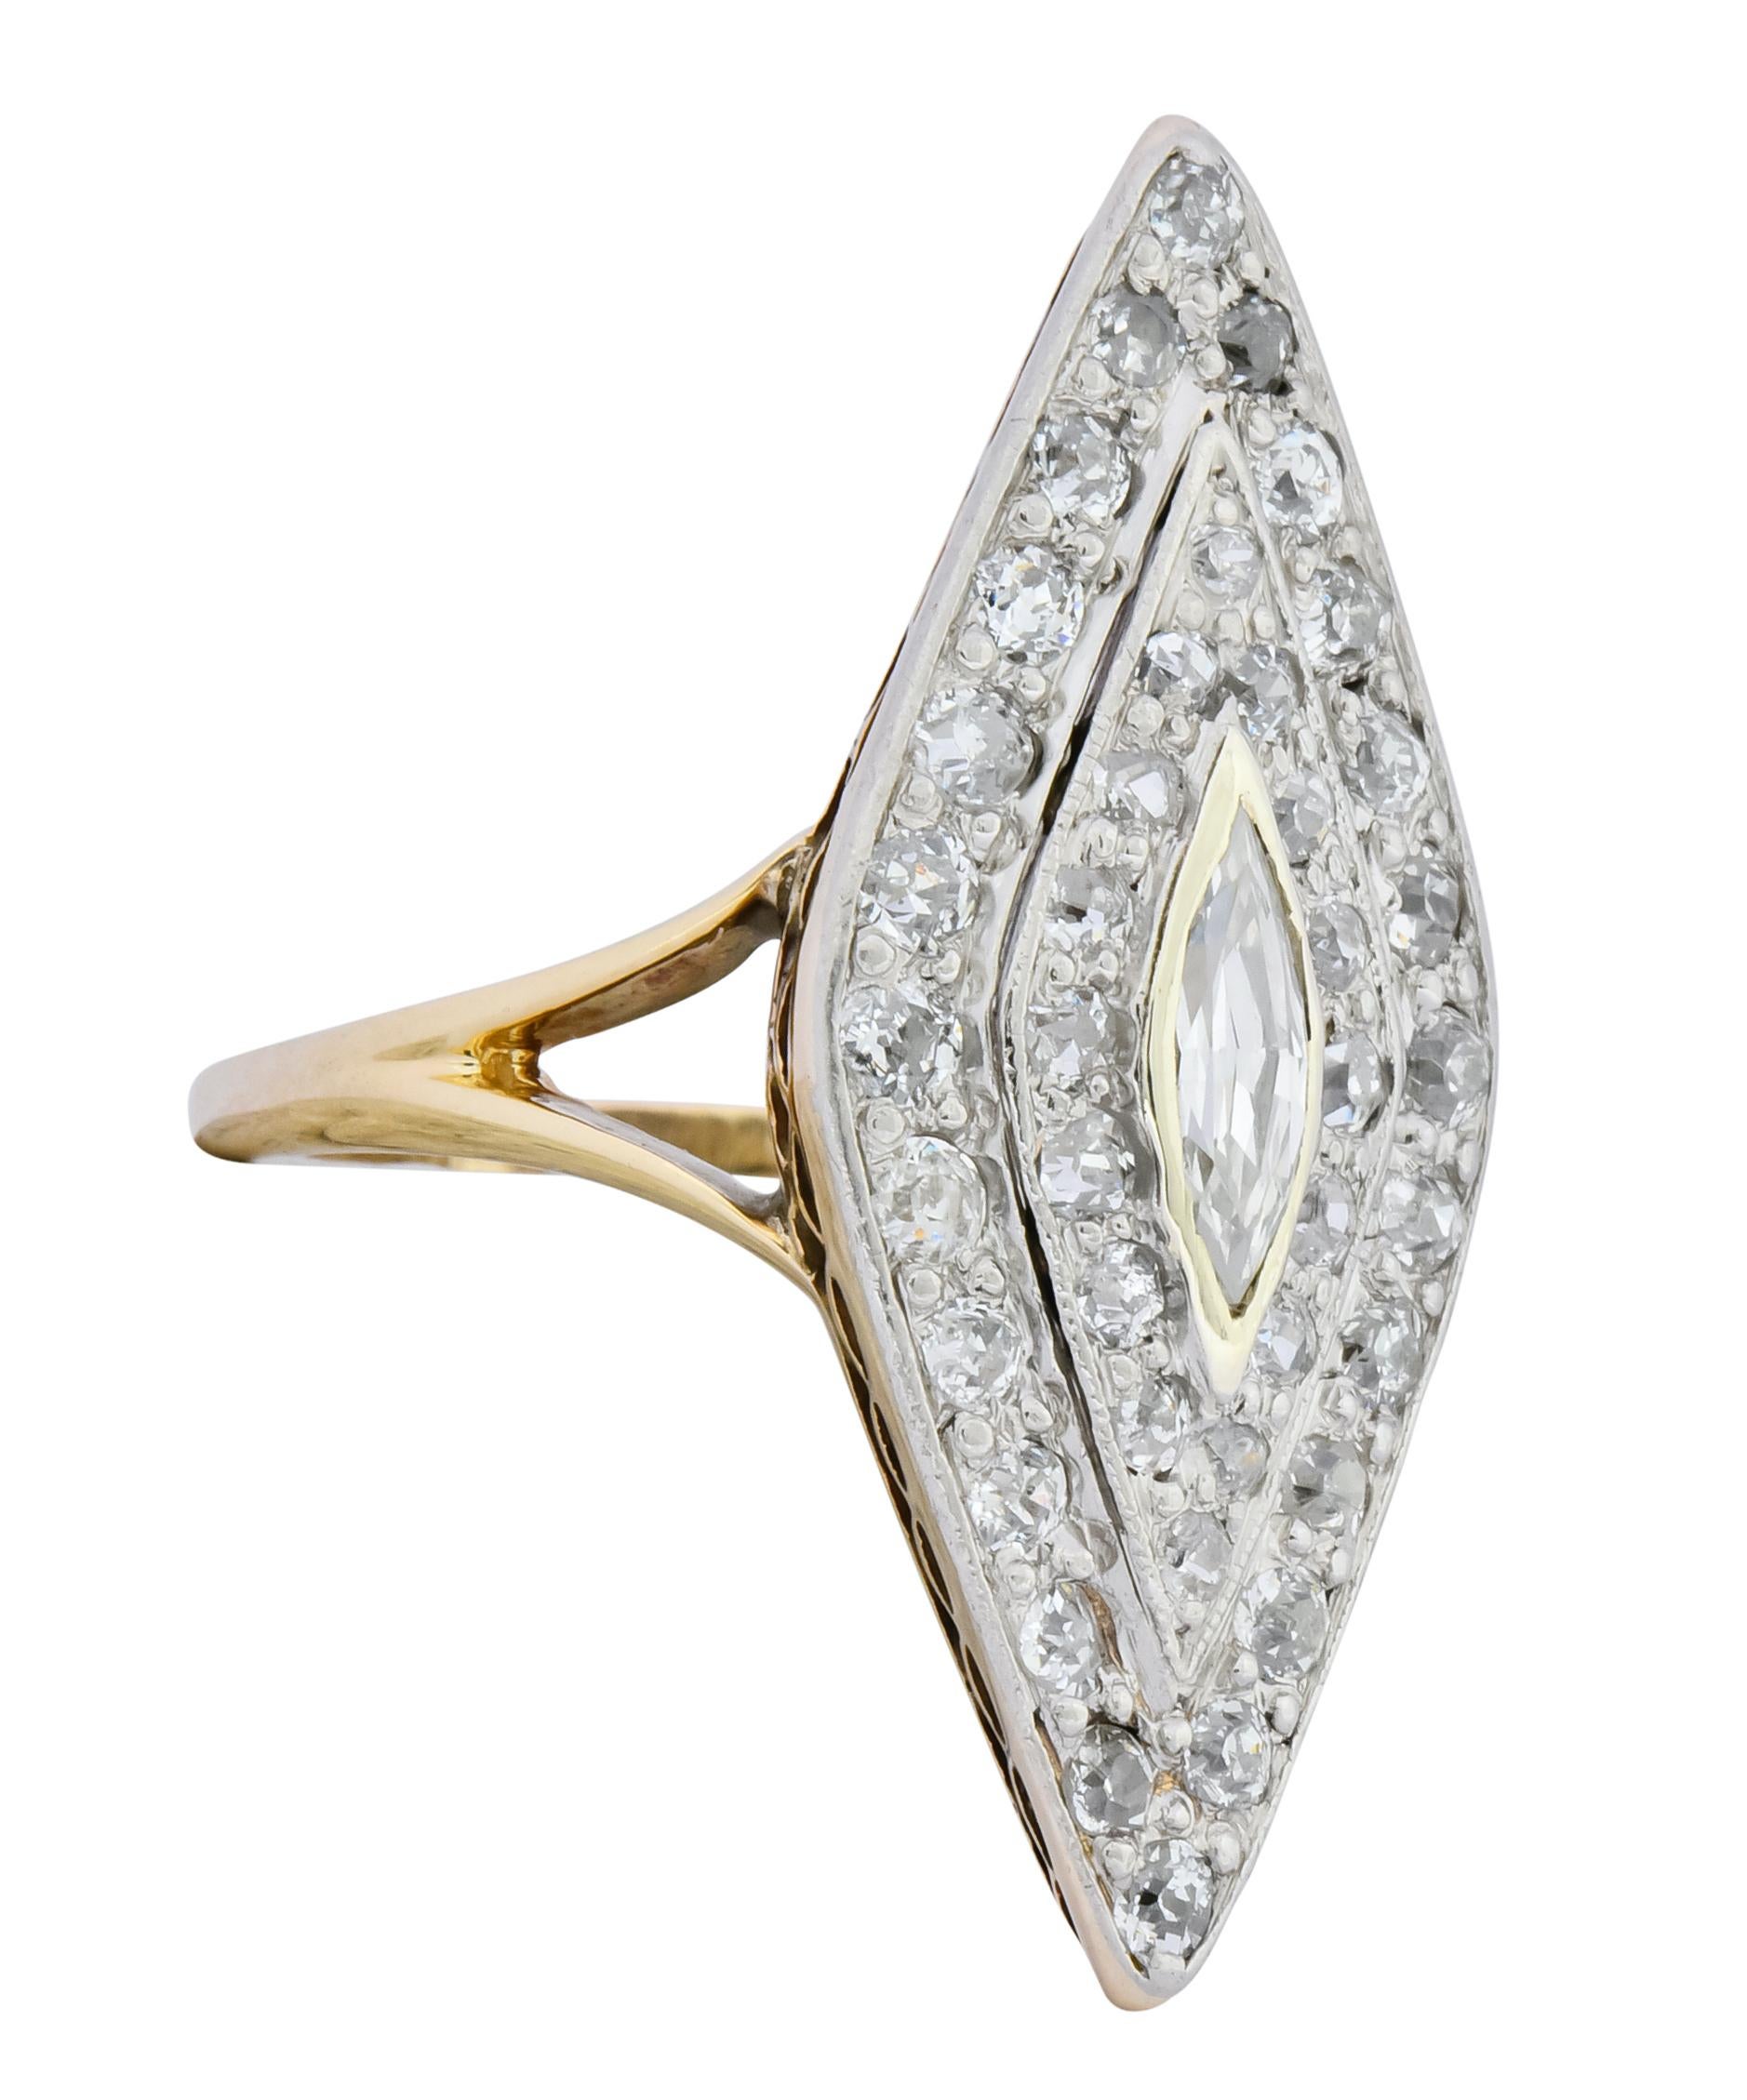 Dinner style ring designed as a double navette halo with a millegrain edge 

Platinum and set throughout with old European cut and marquise cut diamonds weighing approximately 1.60 carats total, G to J color and SI to I clarity 

Completed by a